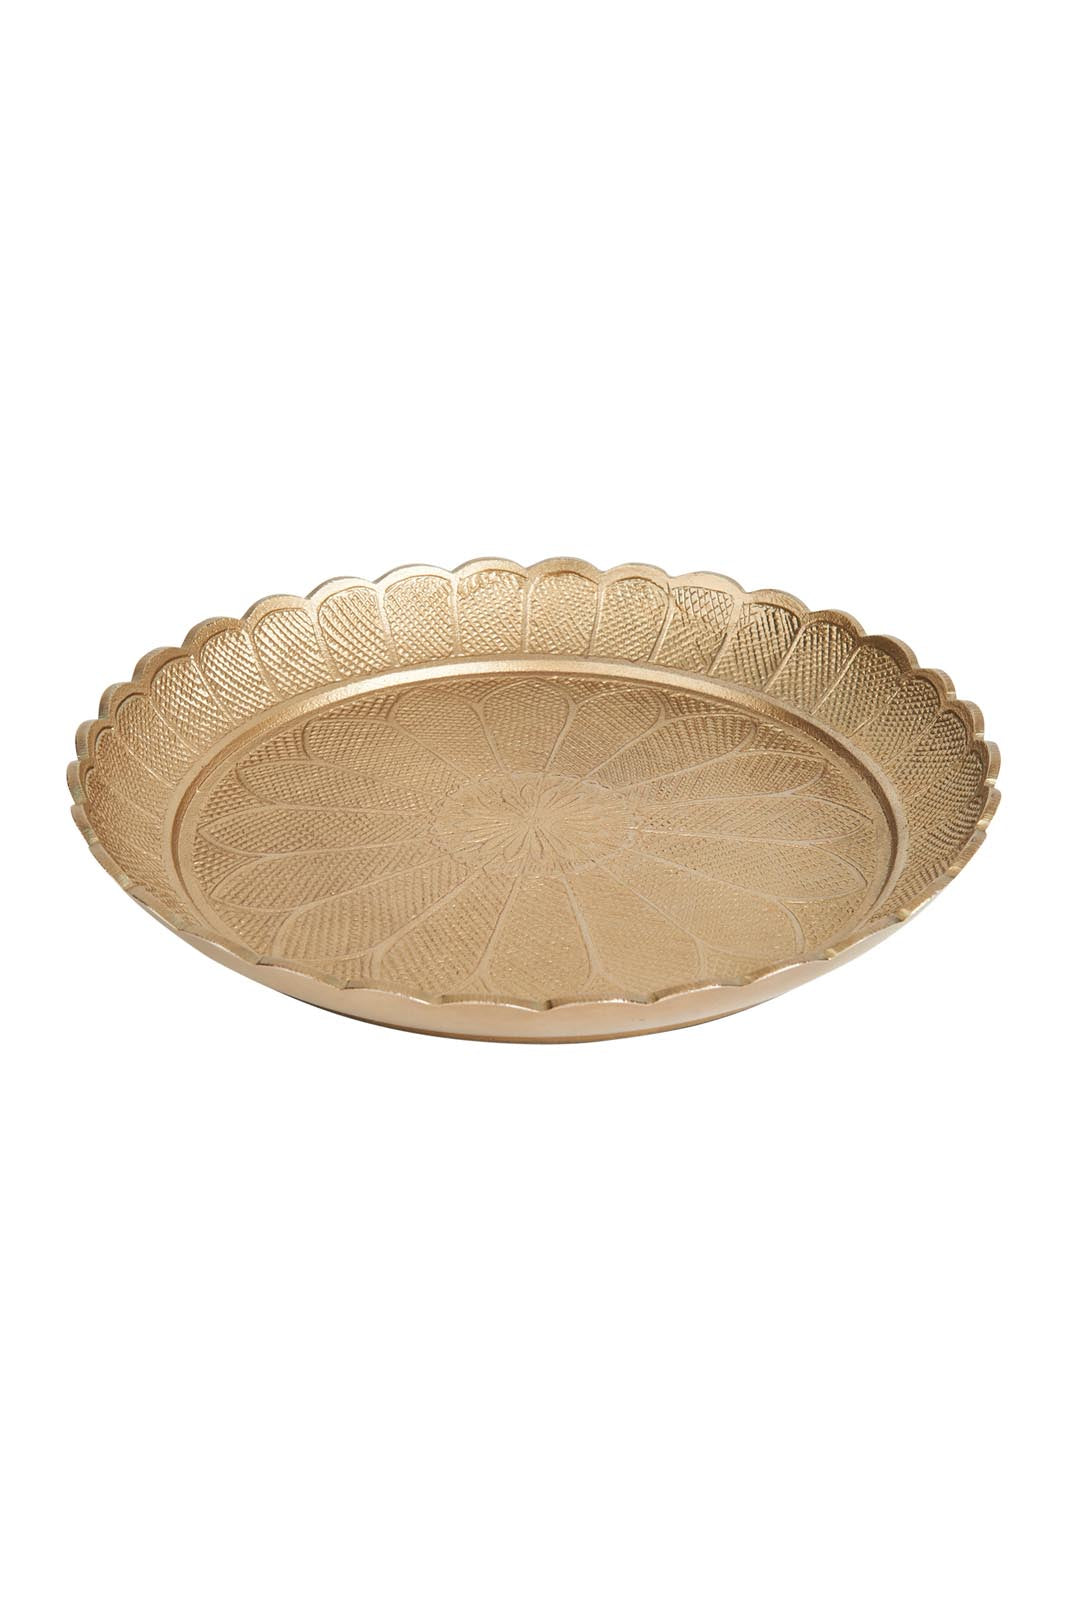 Daisy Luxe Salad Bowl/Platter - Bronze Gold - eb&ive Table Top